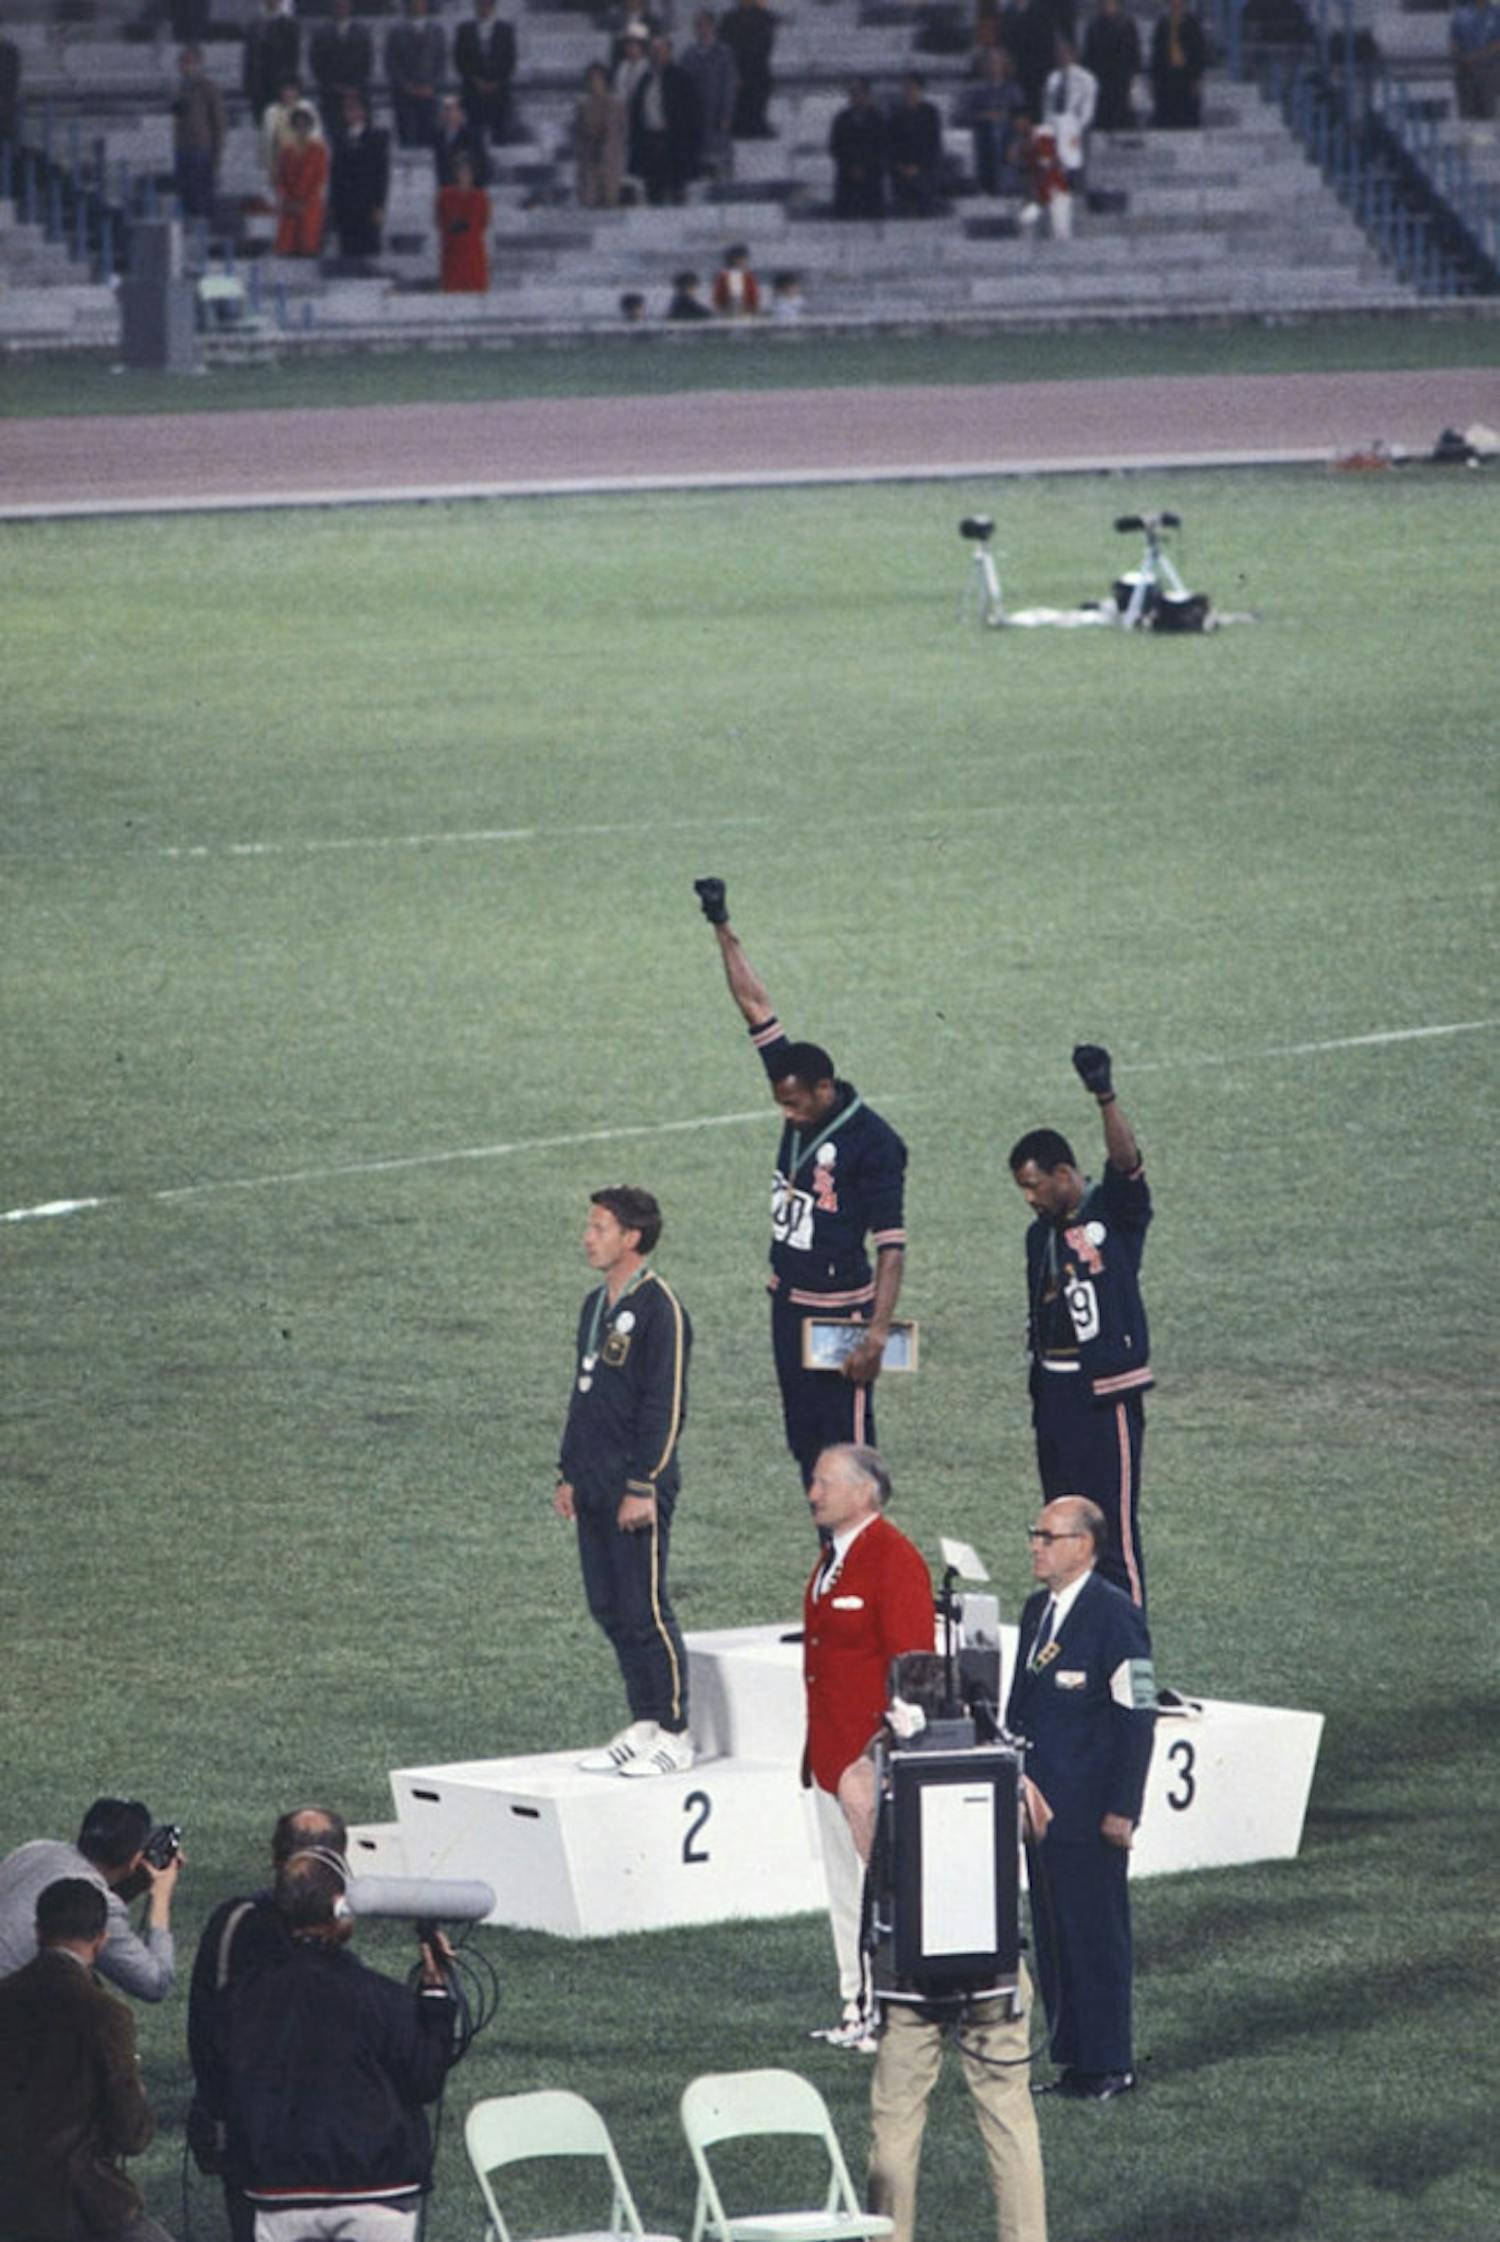 John_Carlos_Tommie_Smith_Peter_Norman_1968